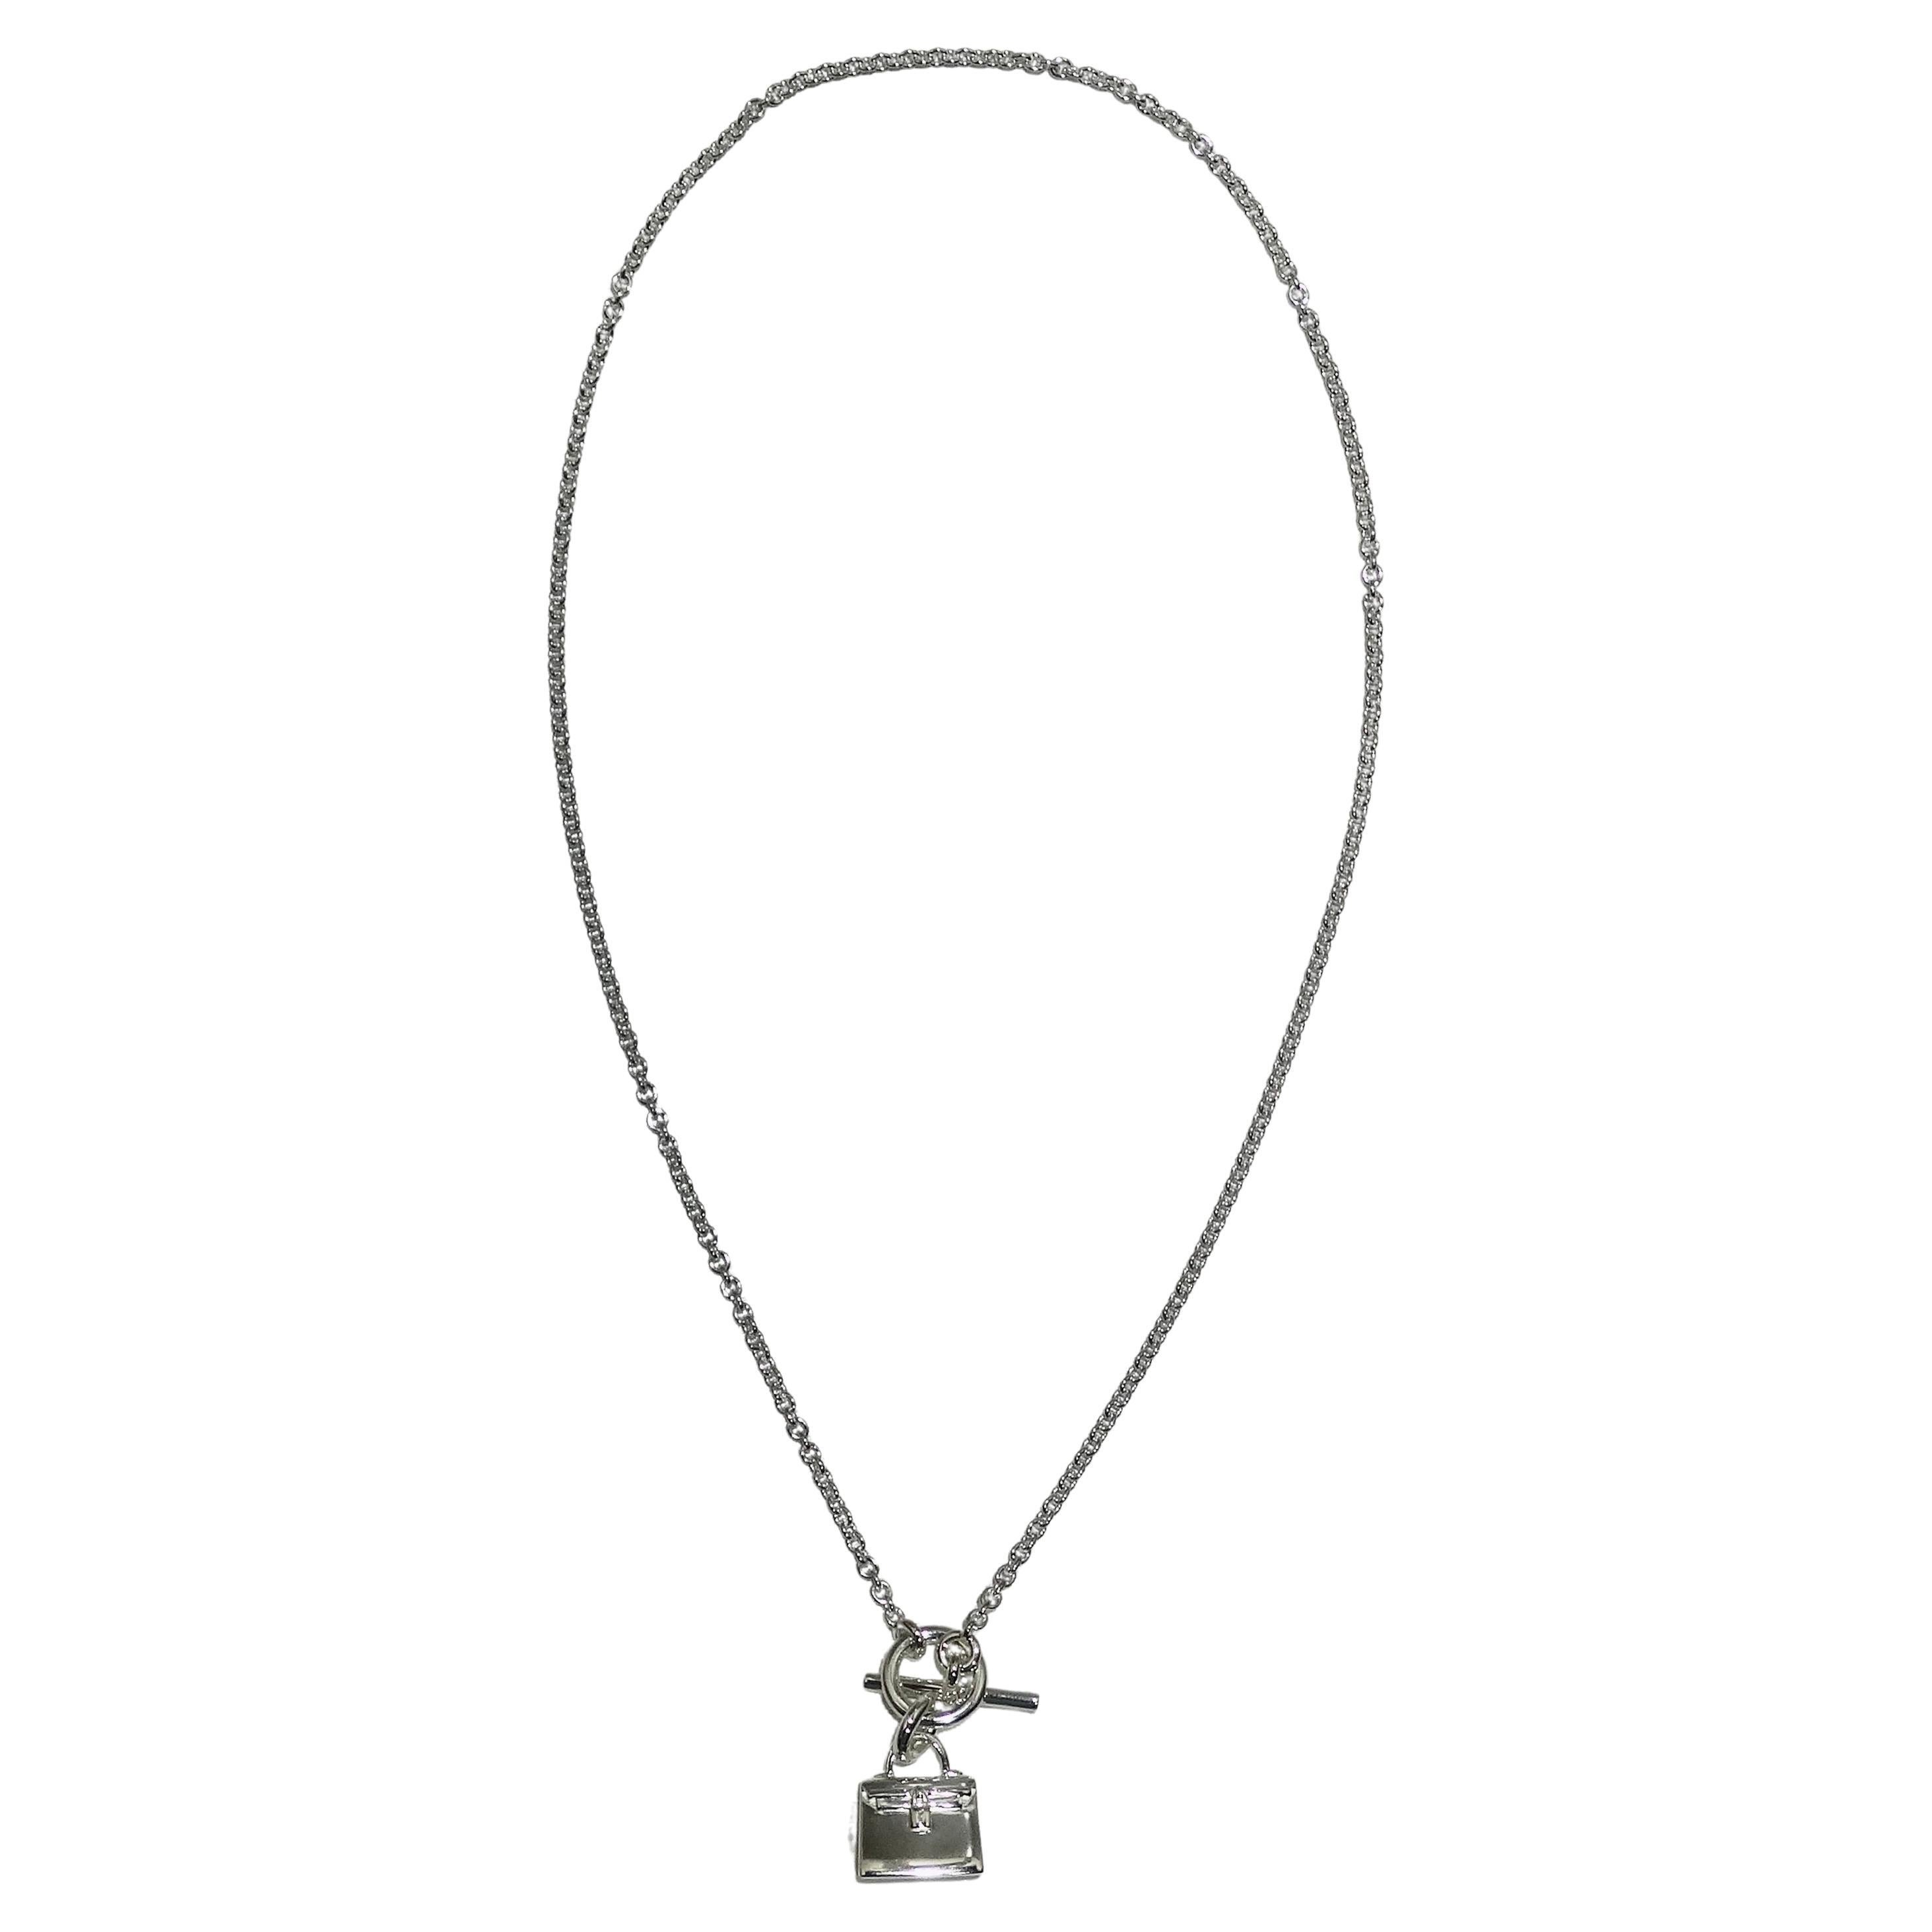 Introducing the Hermes Amulet 925 Silver Kelly Pendant Necklace, a delicate and subtle piece that captures the essence of Hermes' iconic design. This beautiful necklace features a sterling silver chain with a toggle closure, offering a secure and